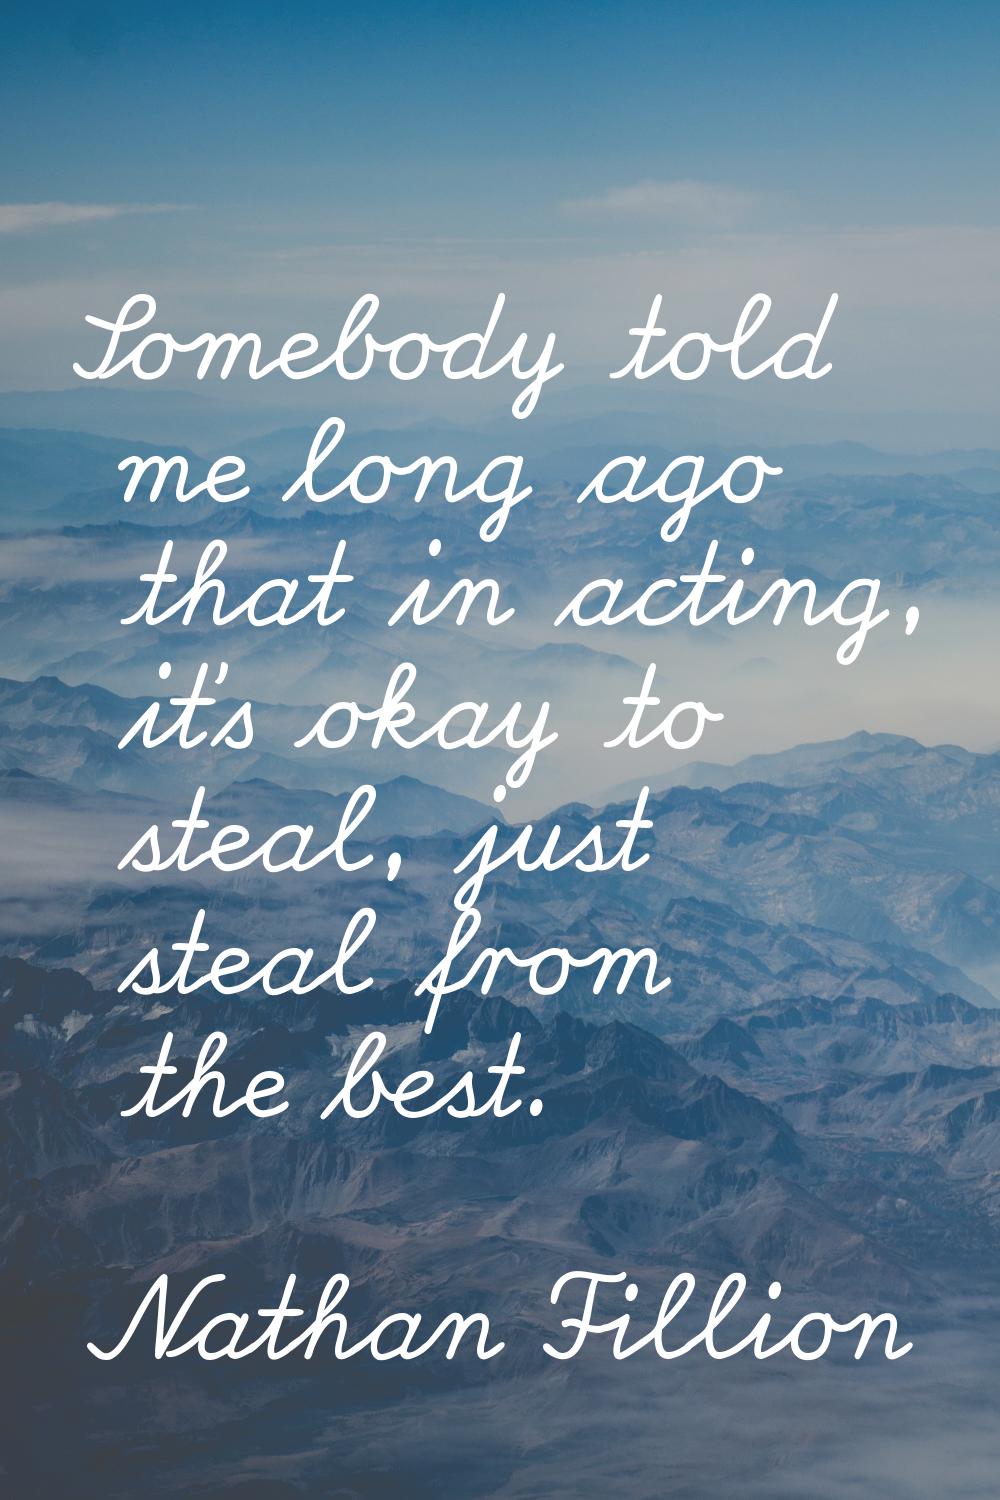 Somebody told me long ago that in acting, it's okay to steal, just steal from the best.